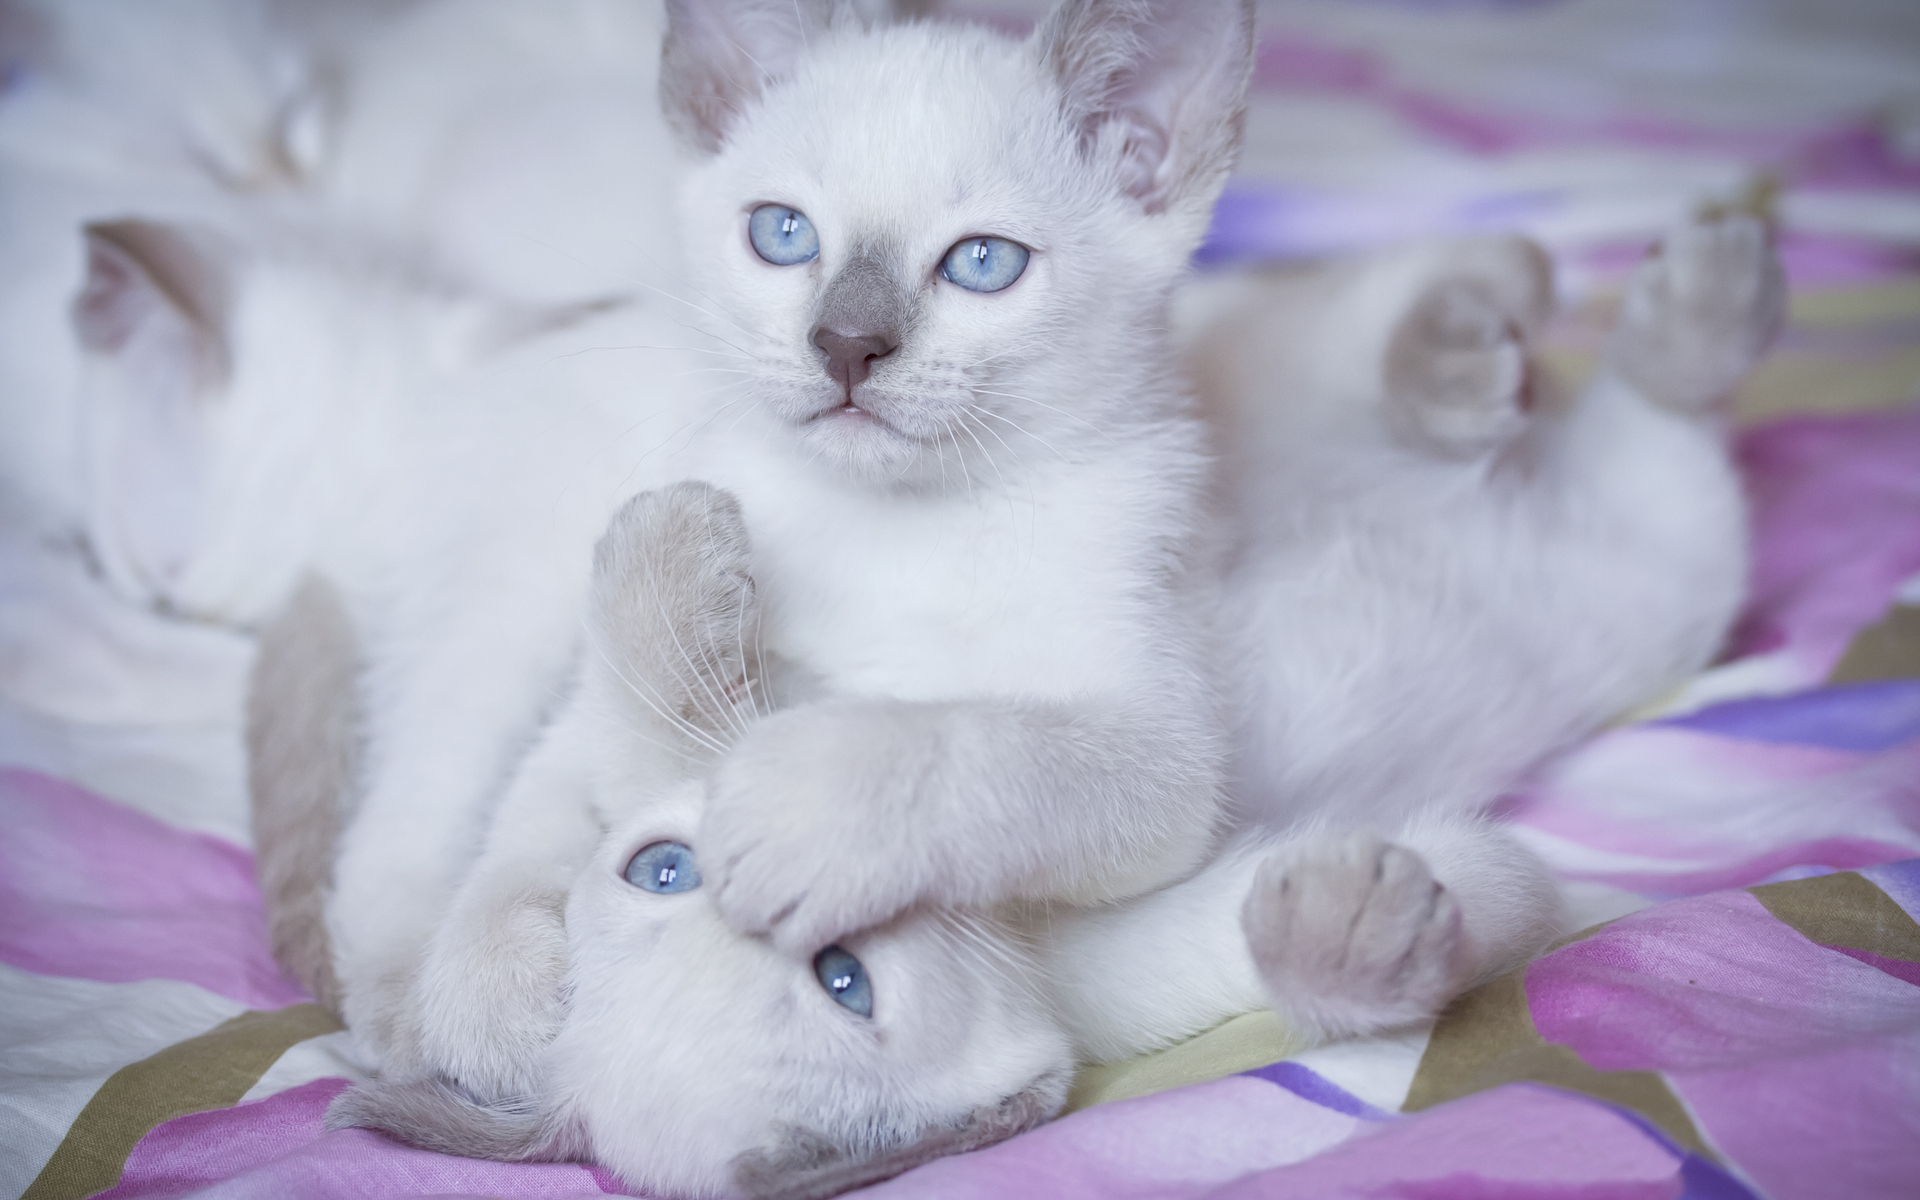 animals, Cats, Kittens, Babies, White, Soft, Fur, Face, Play, Sibling, Paw, Nose, Mouth, Feet, Cute, Feline Wallpaper